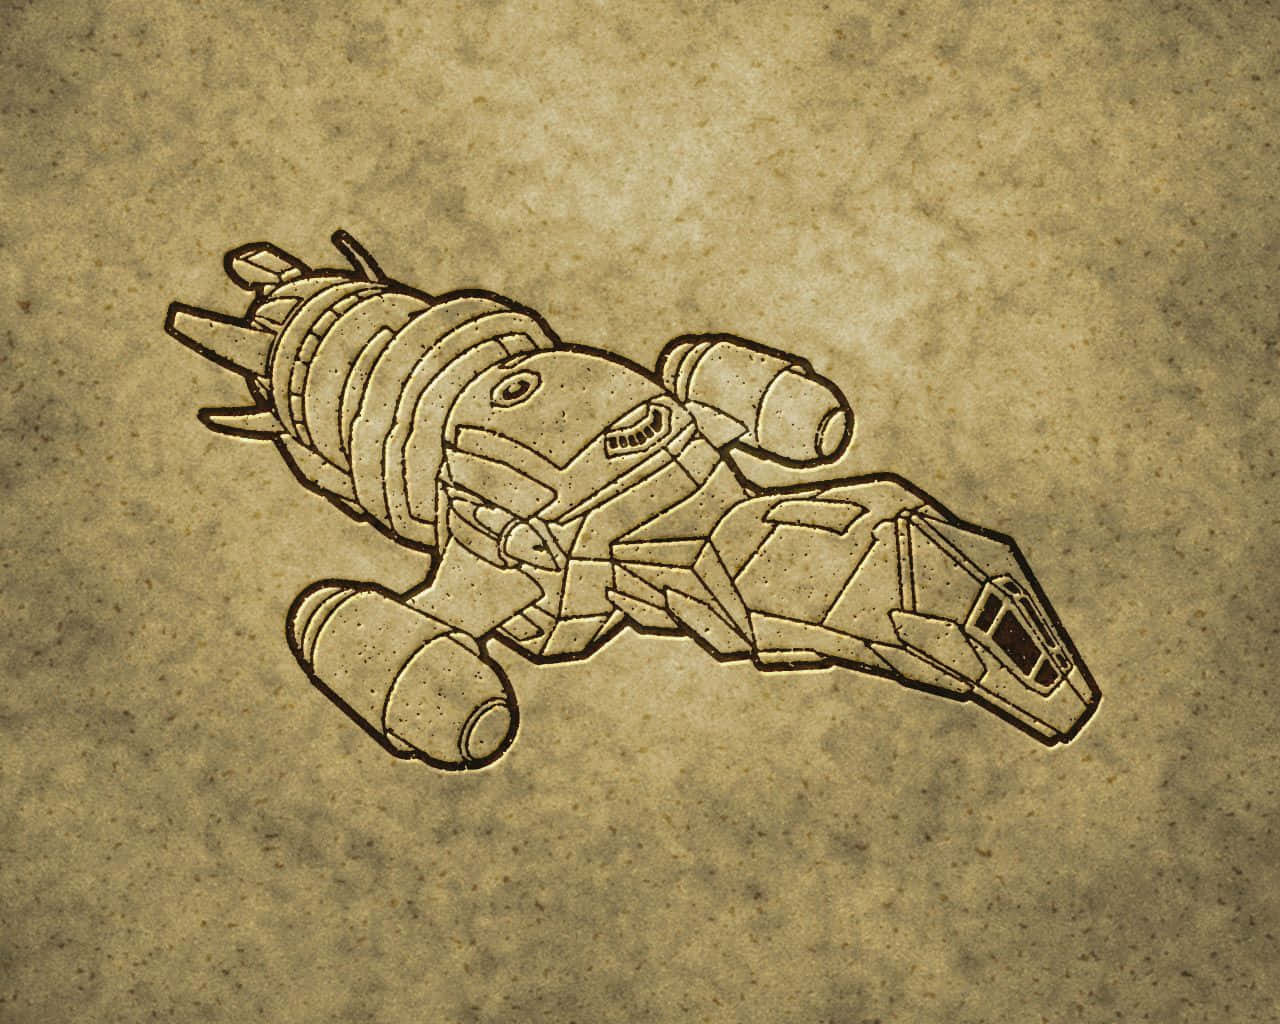 serenity firefly ship drawing